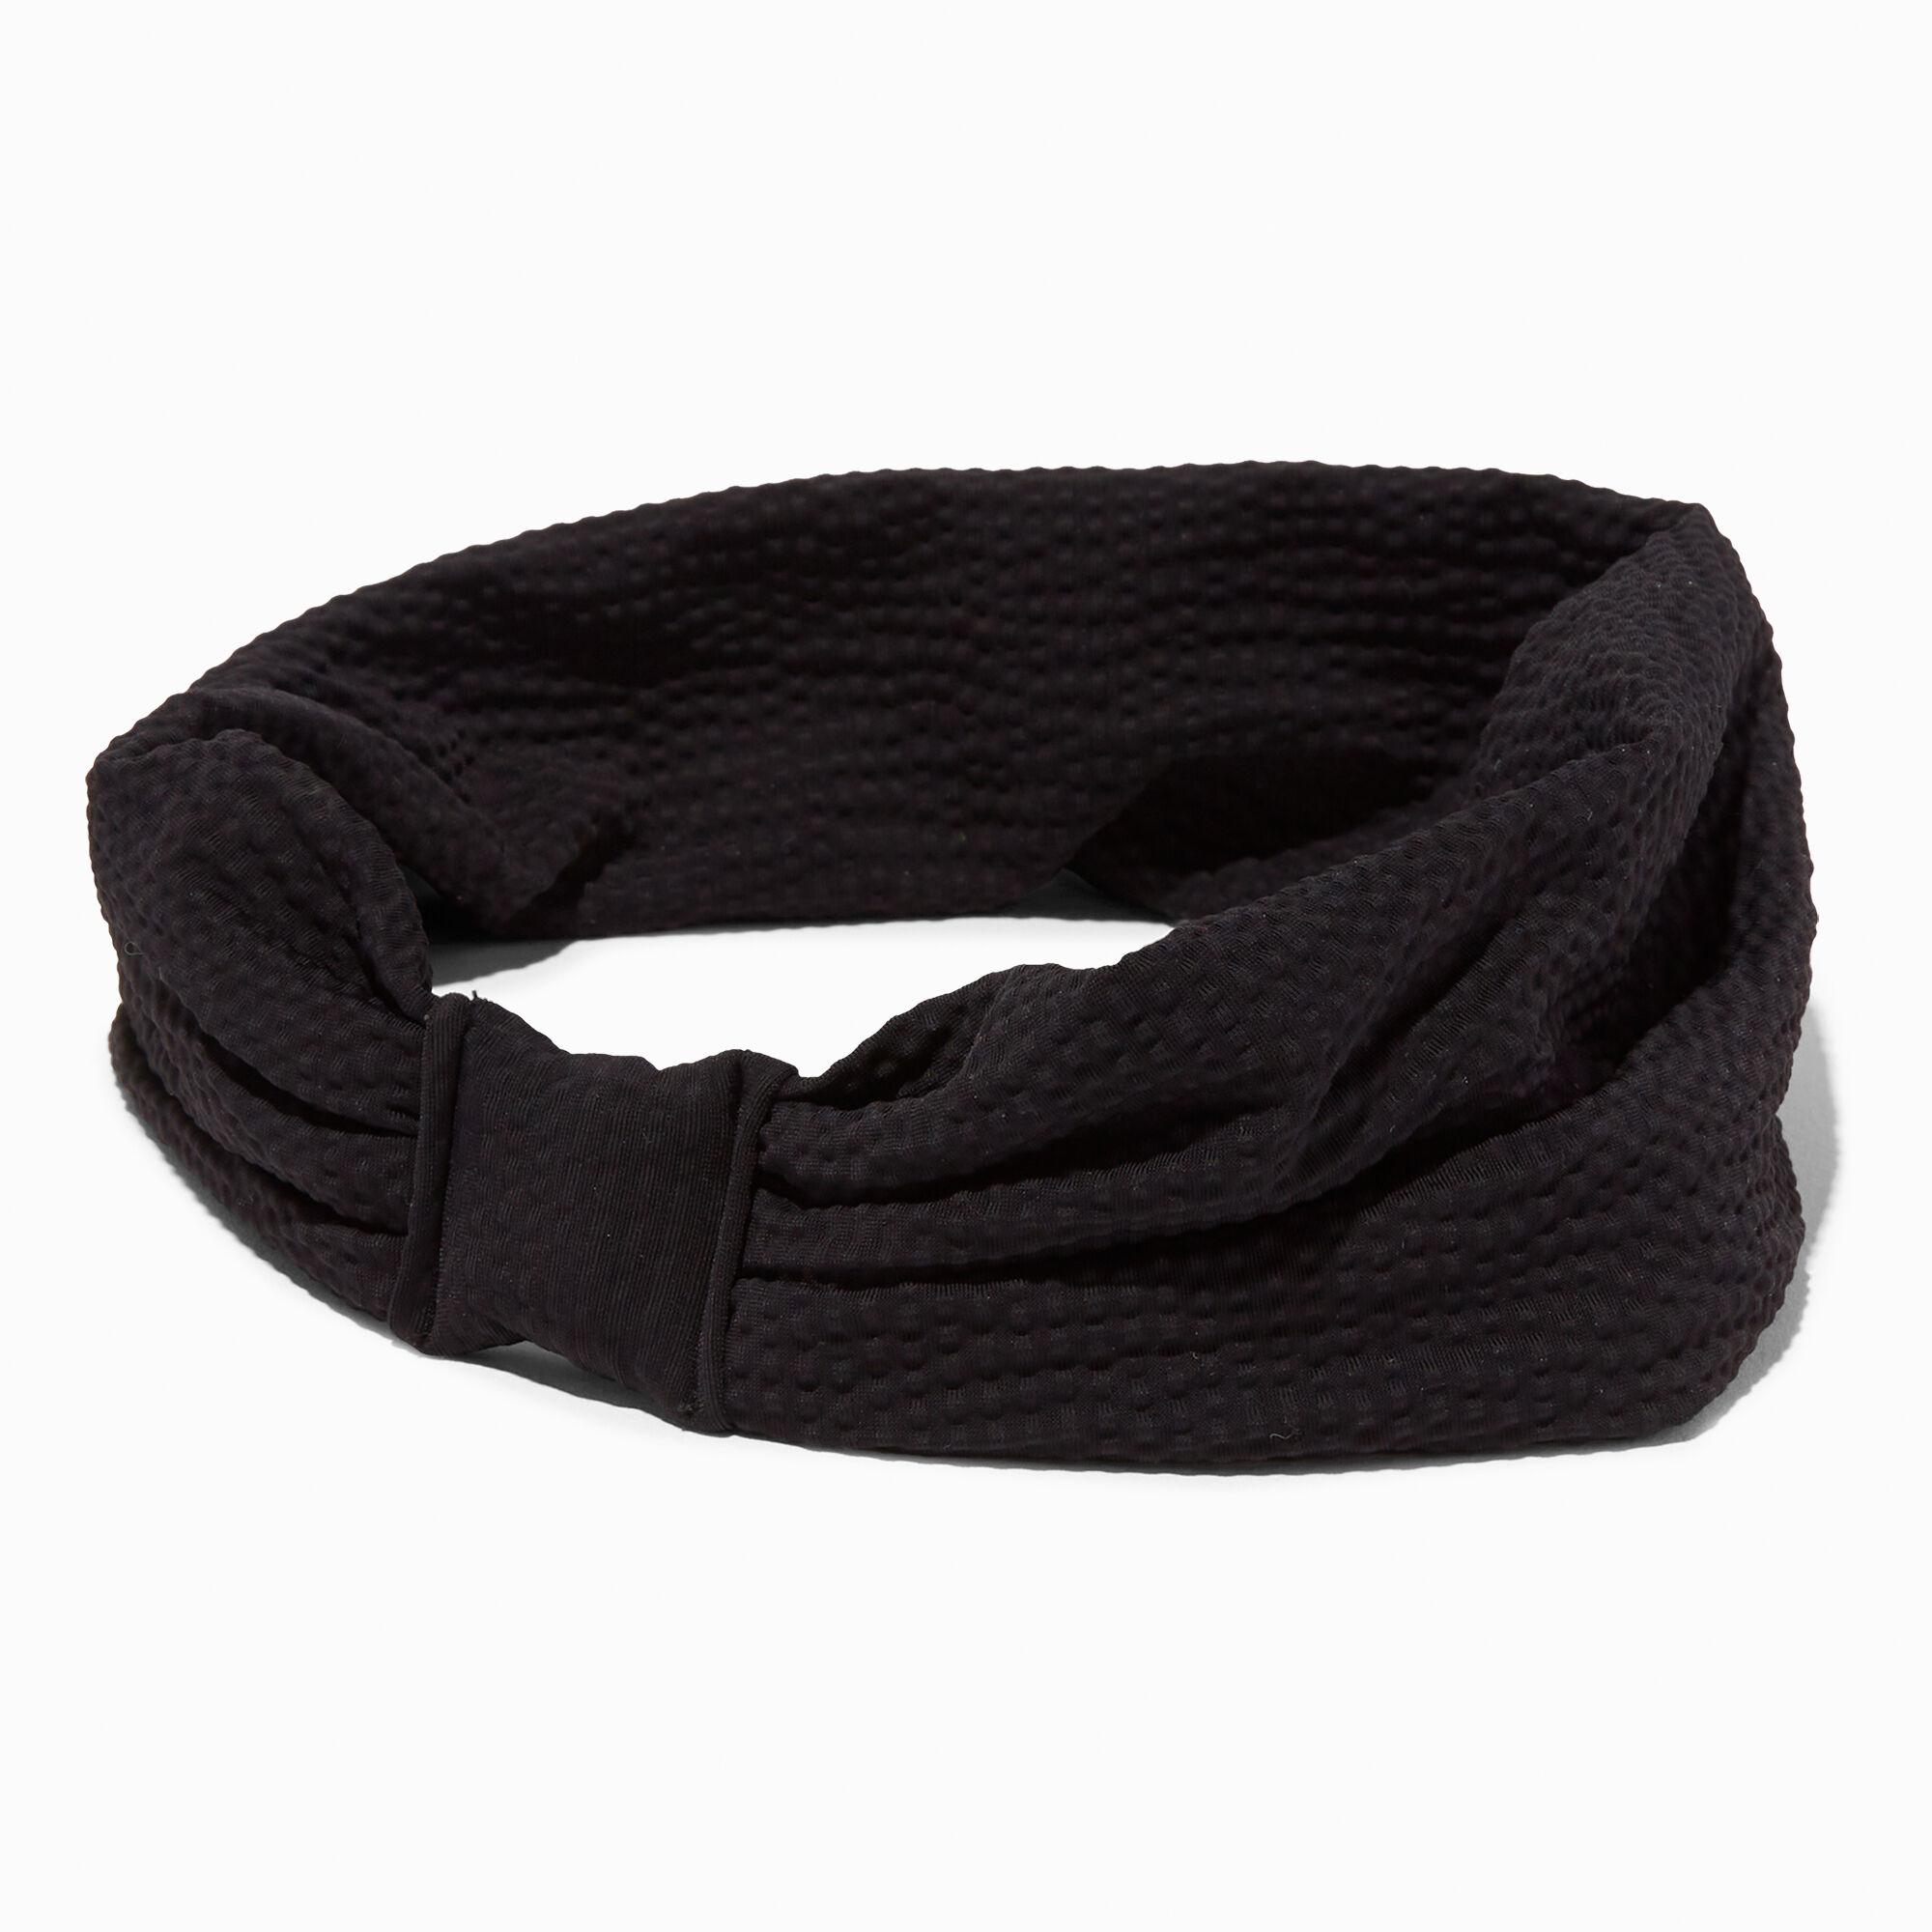 View Claires Knotted Headwrap Black information